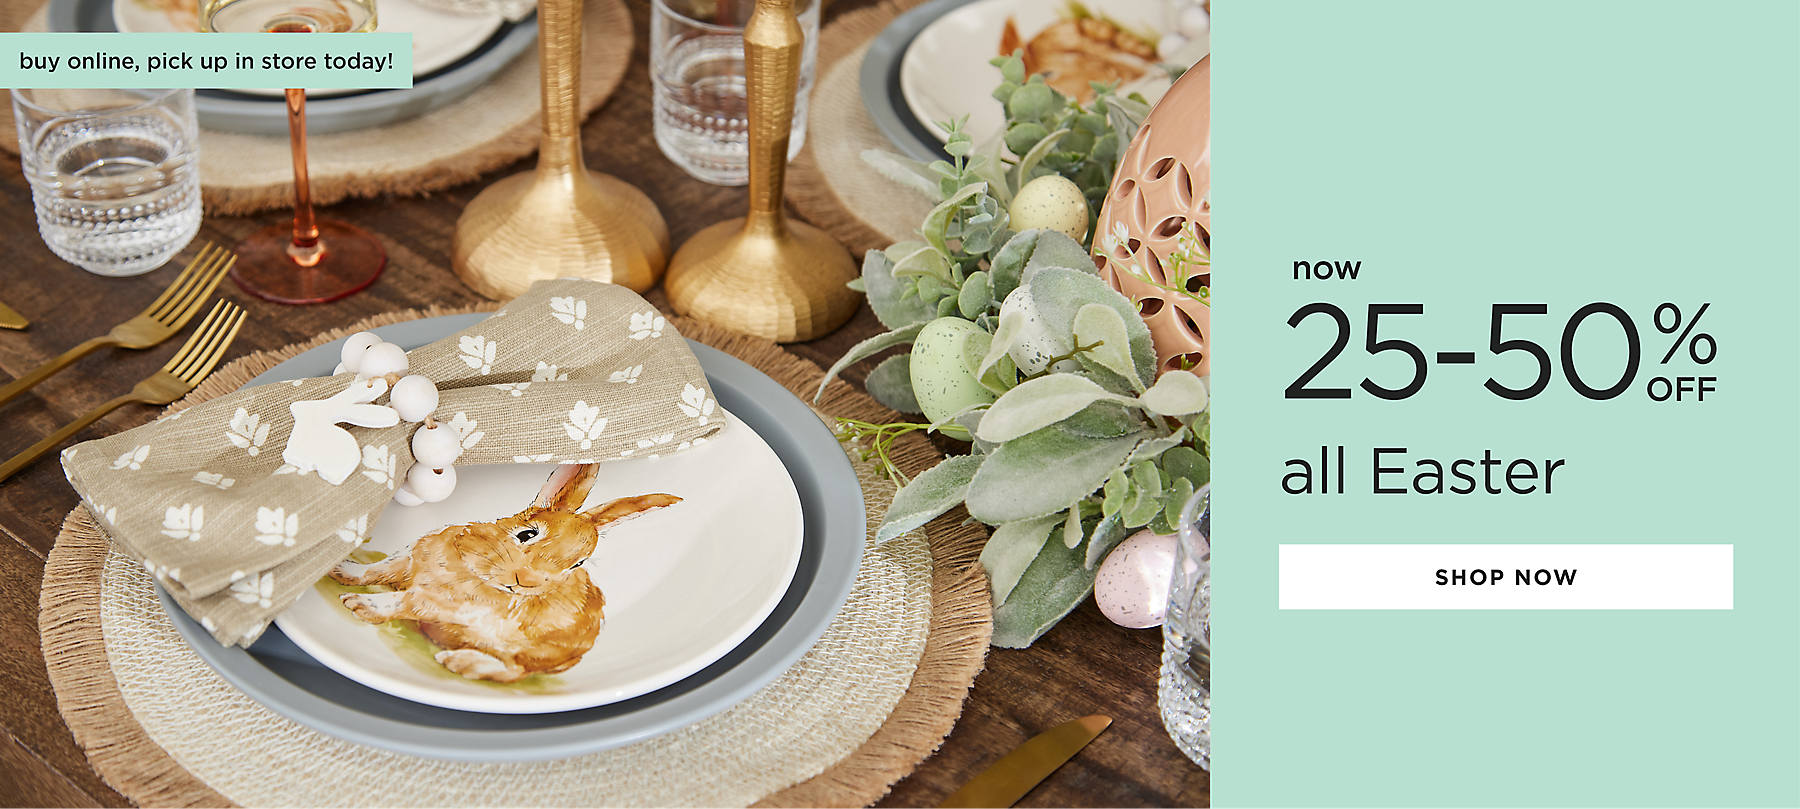 all Easter now 25-50% off shop now buy online, pick up in store today!